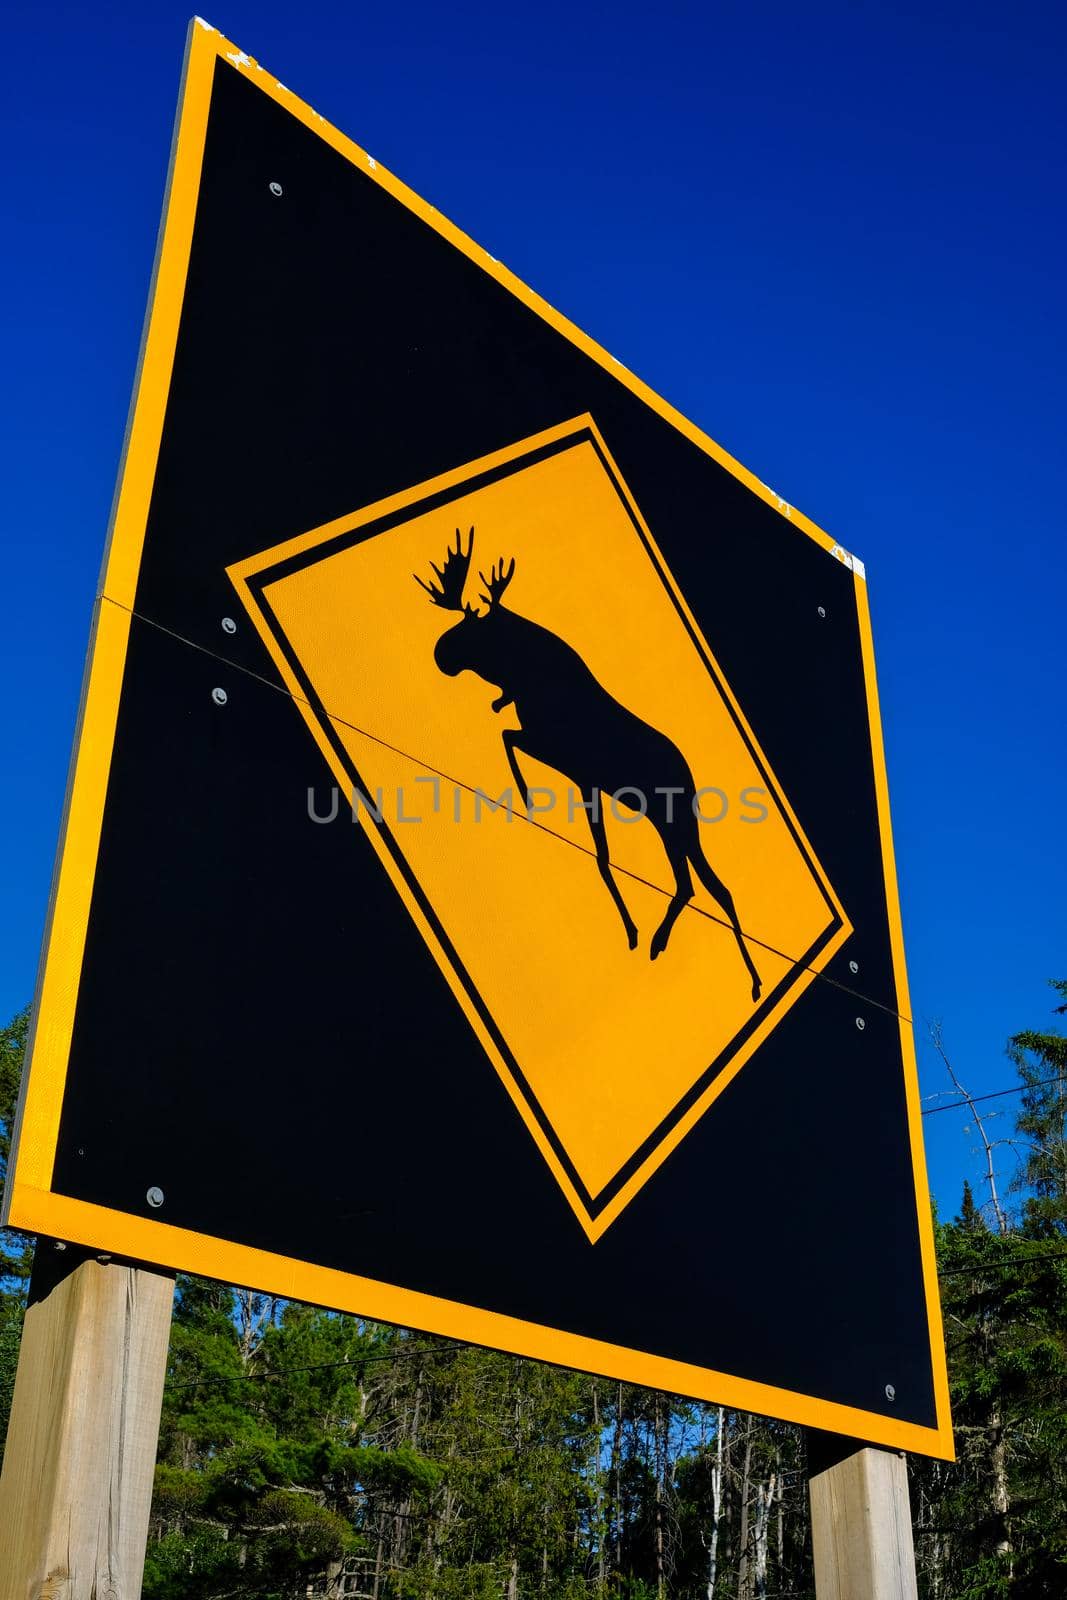 Low-angle view of a large moose crossing warning sign in Algonquin Park, Ontario, Canada.